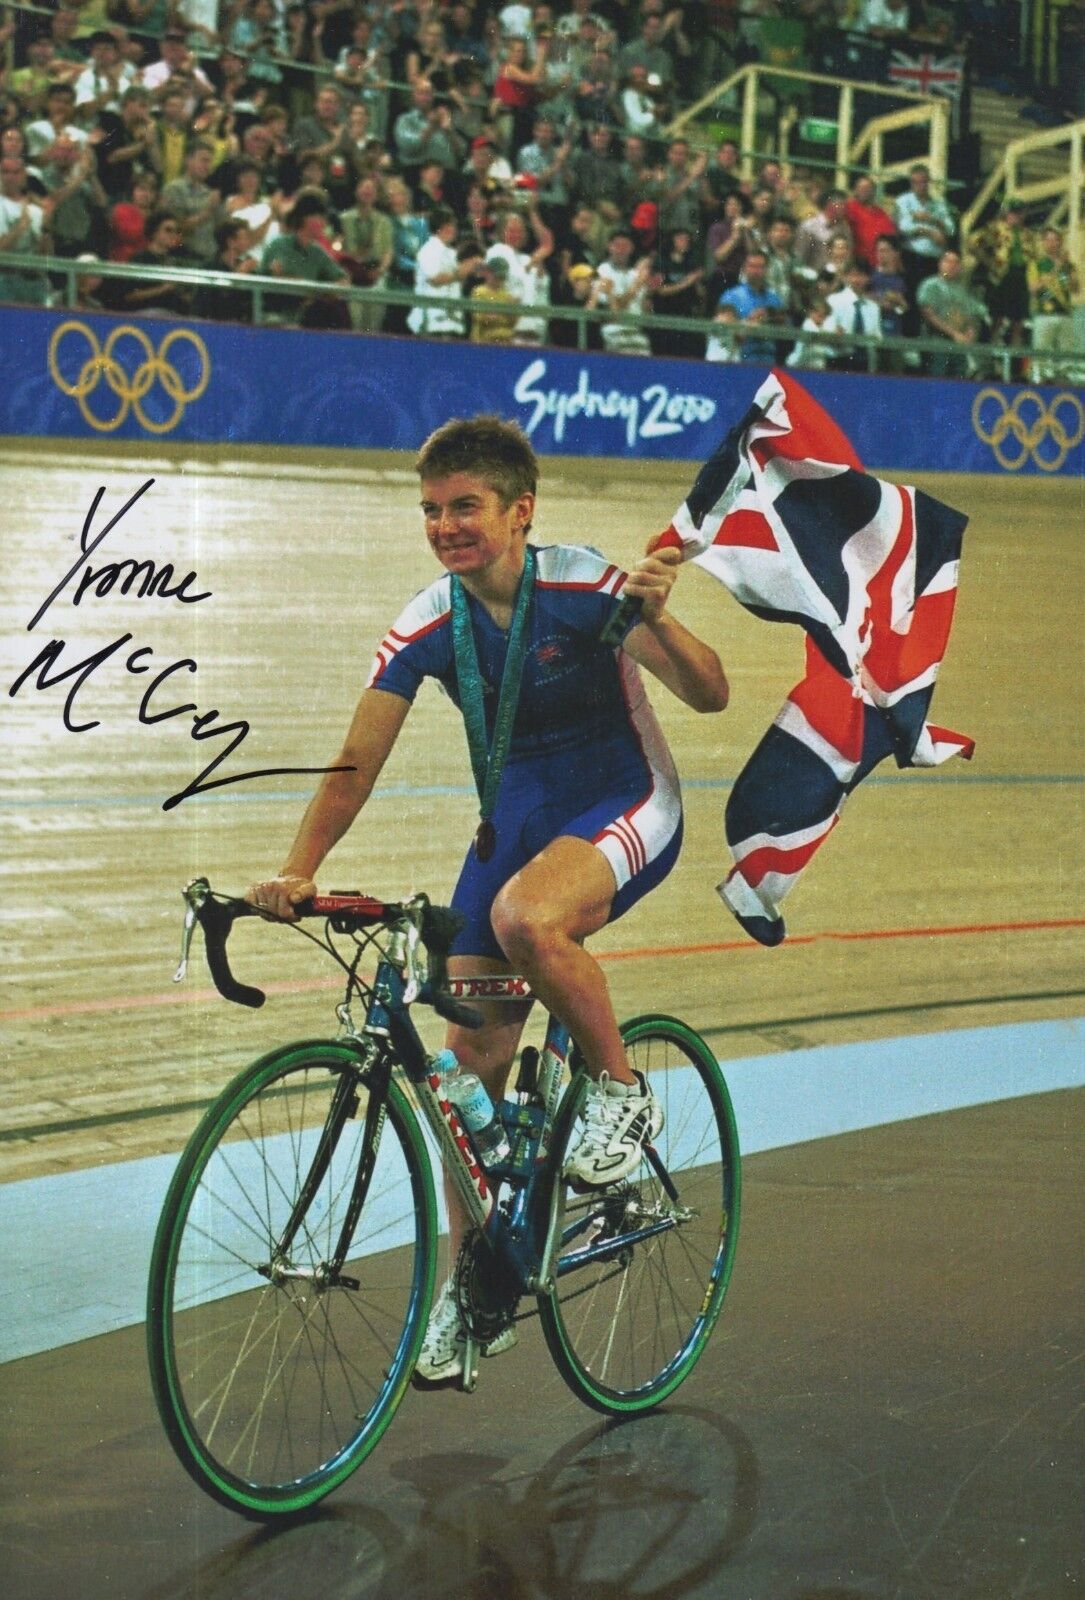 Yvonne McGregor Hand Signed Olympics 12x8 Photo Poster painting.